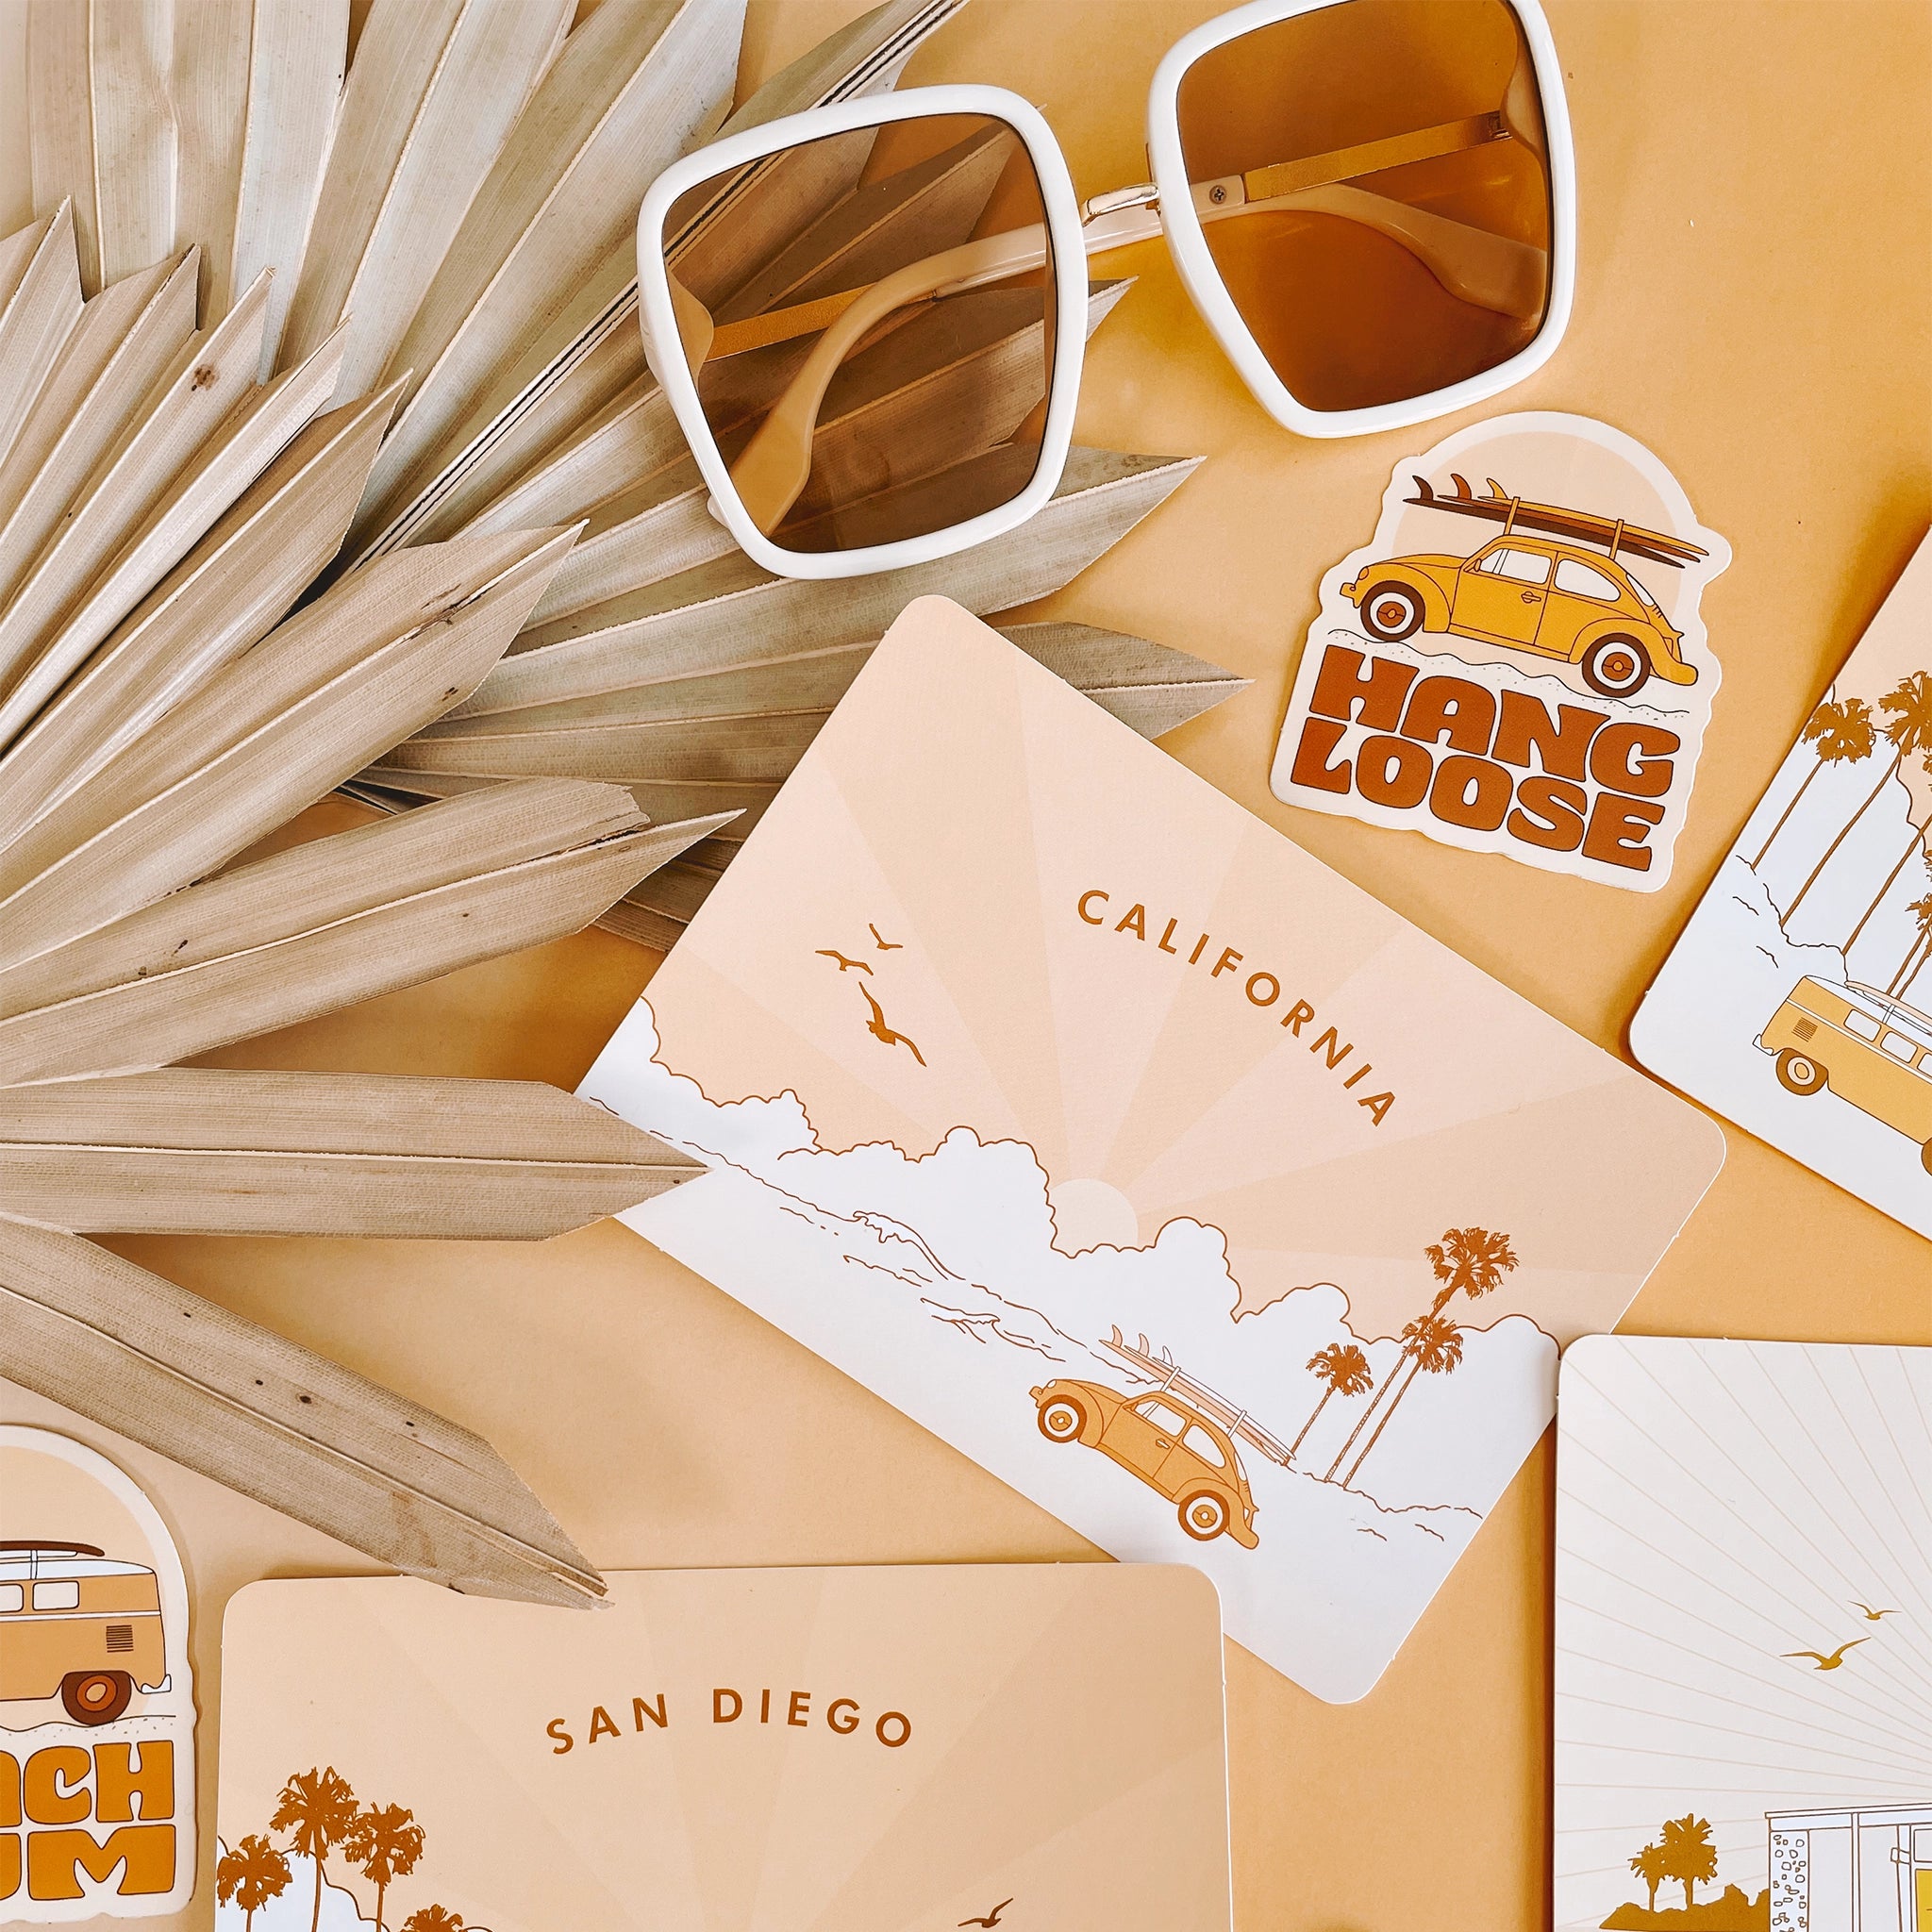 On a peachy background is a variety of postcards photographed next to a sticker that reads, "Hang Loose" and white 70's style sunglasses.  The main postcard is a light yellow with an illustration of the ocean and a yellow VW bug with a surfboard on top, palm trees in the background and text arched across the top that reads, "California". 